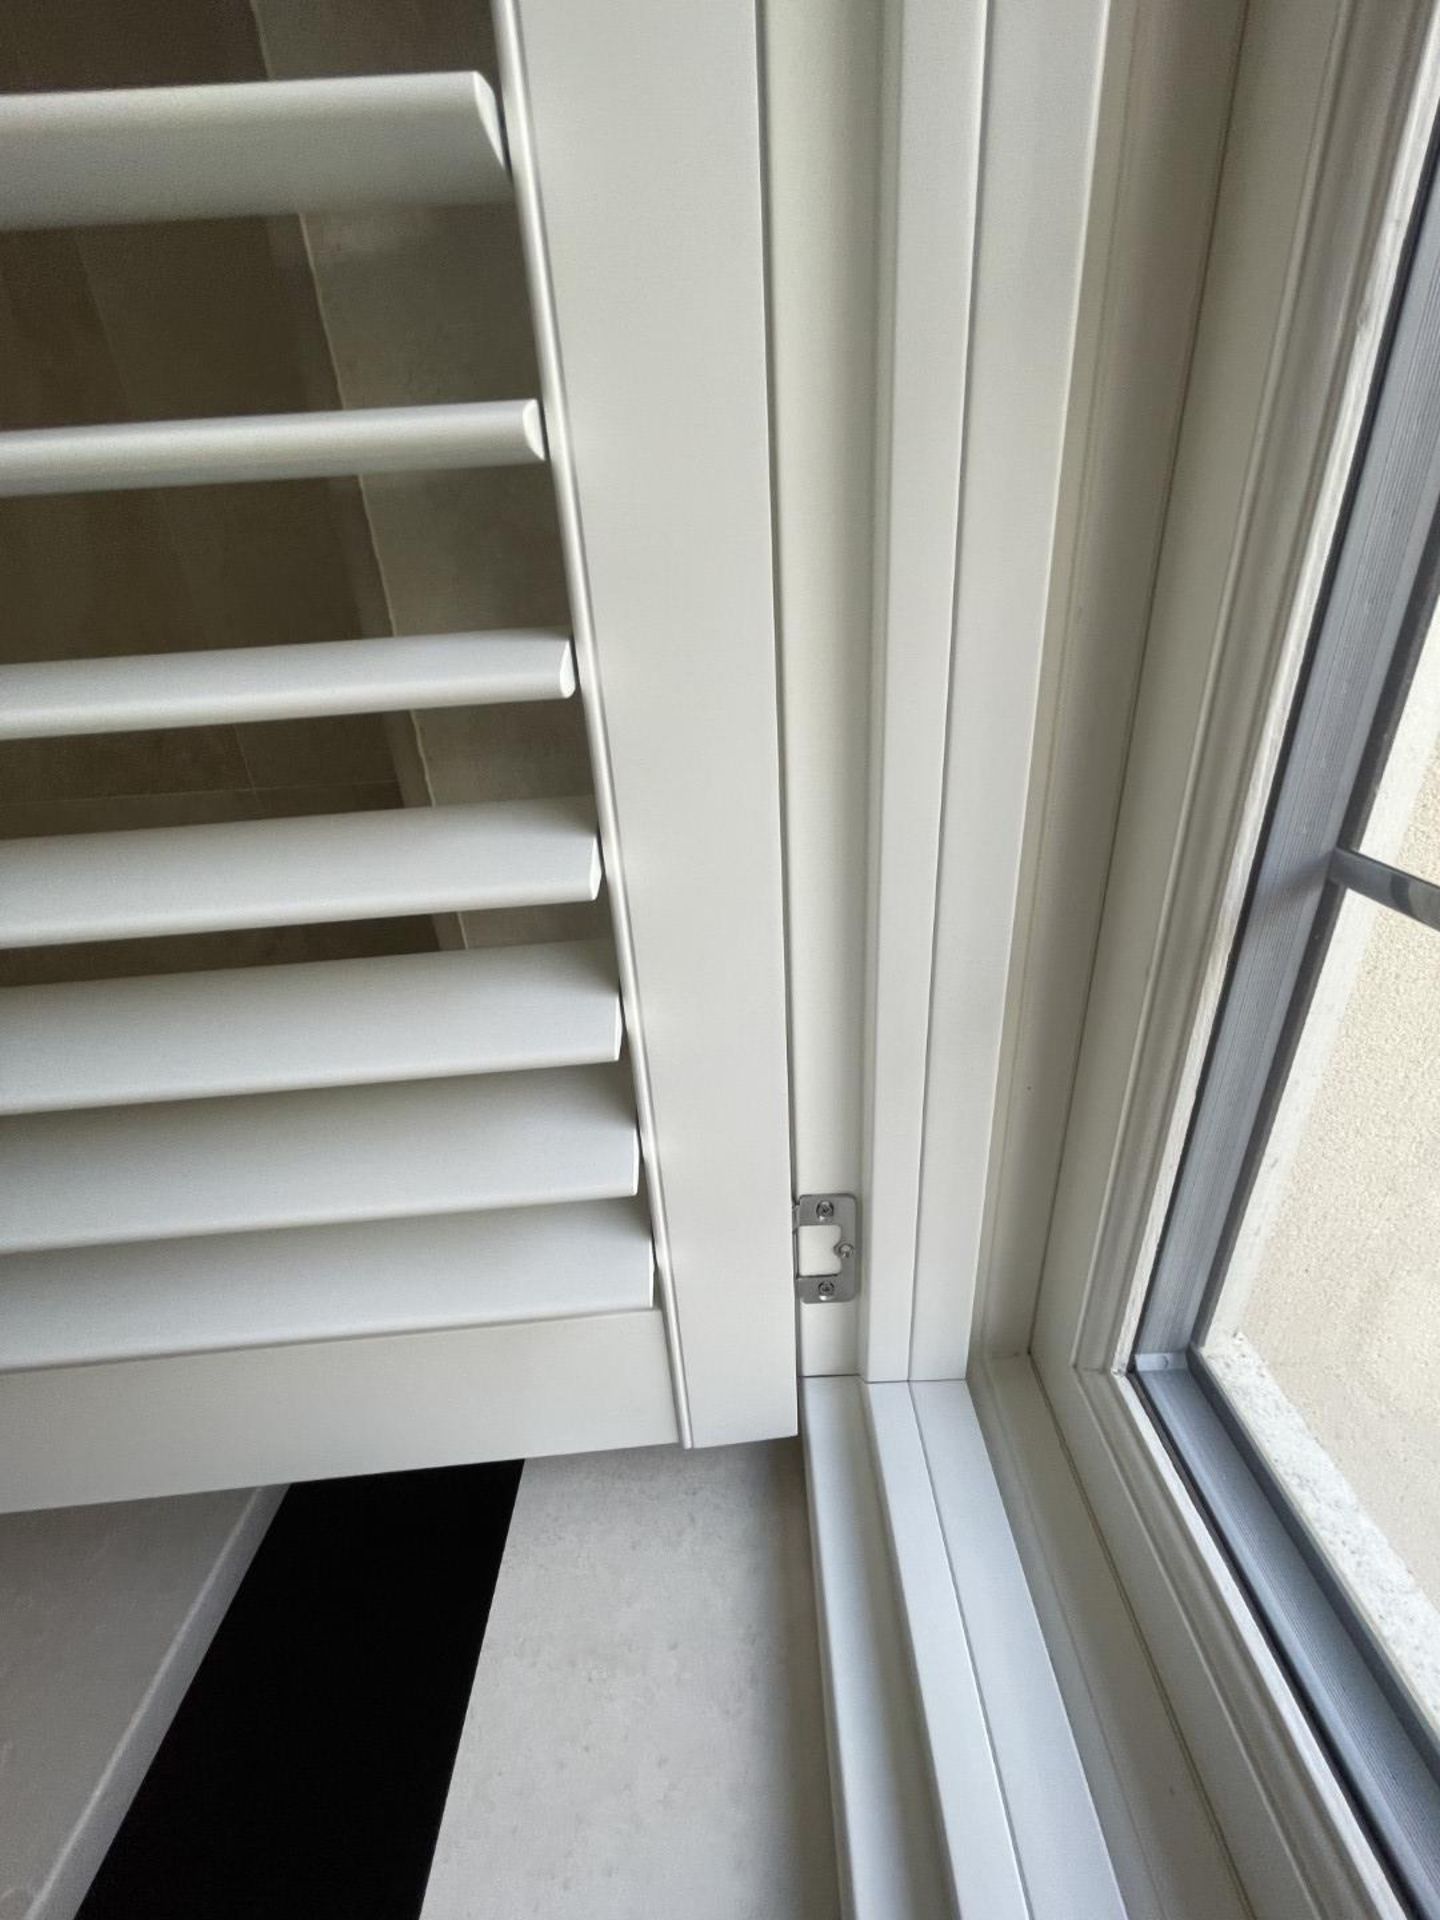 1 x Hardwood Timber Double Glazed Leaded 3-Pane Window Frame fitted with Shutter Blinds - Image 6 of 15